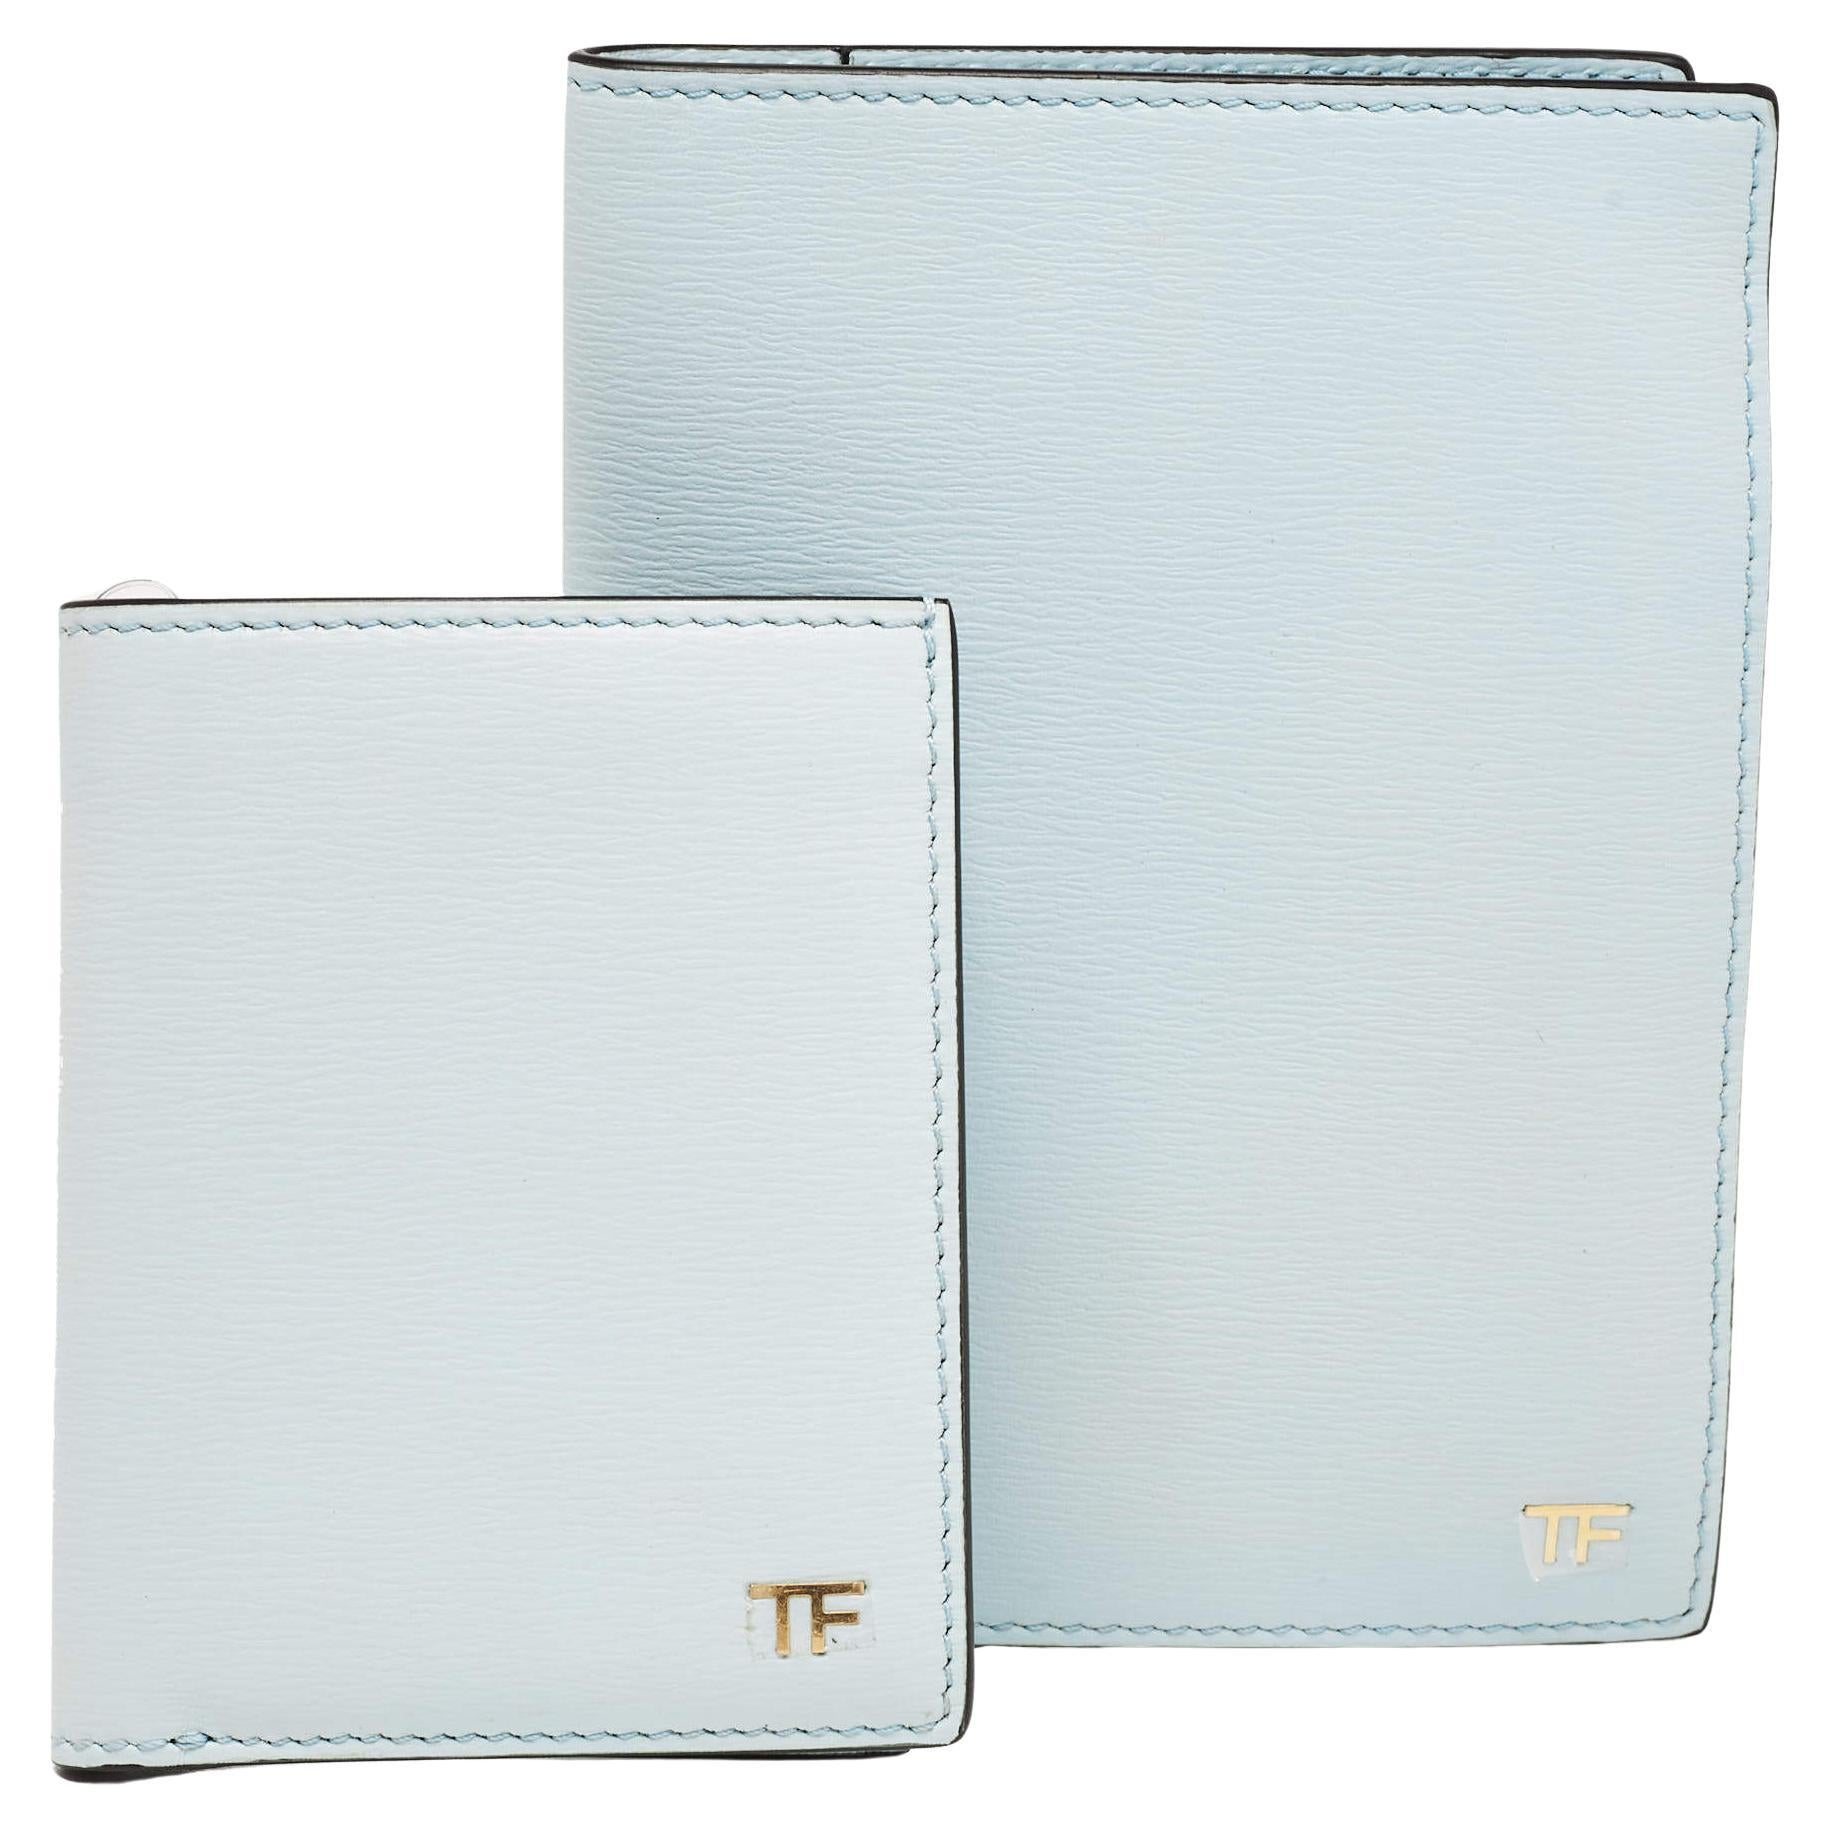 Tom Ford Light Turquoise Leather TF Passport Holder and Card Case Set